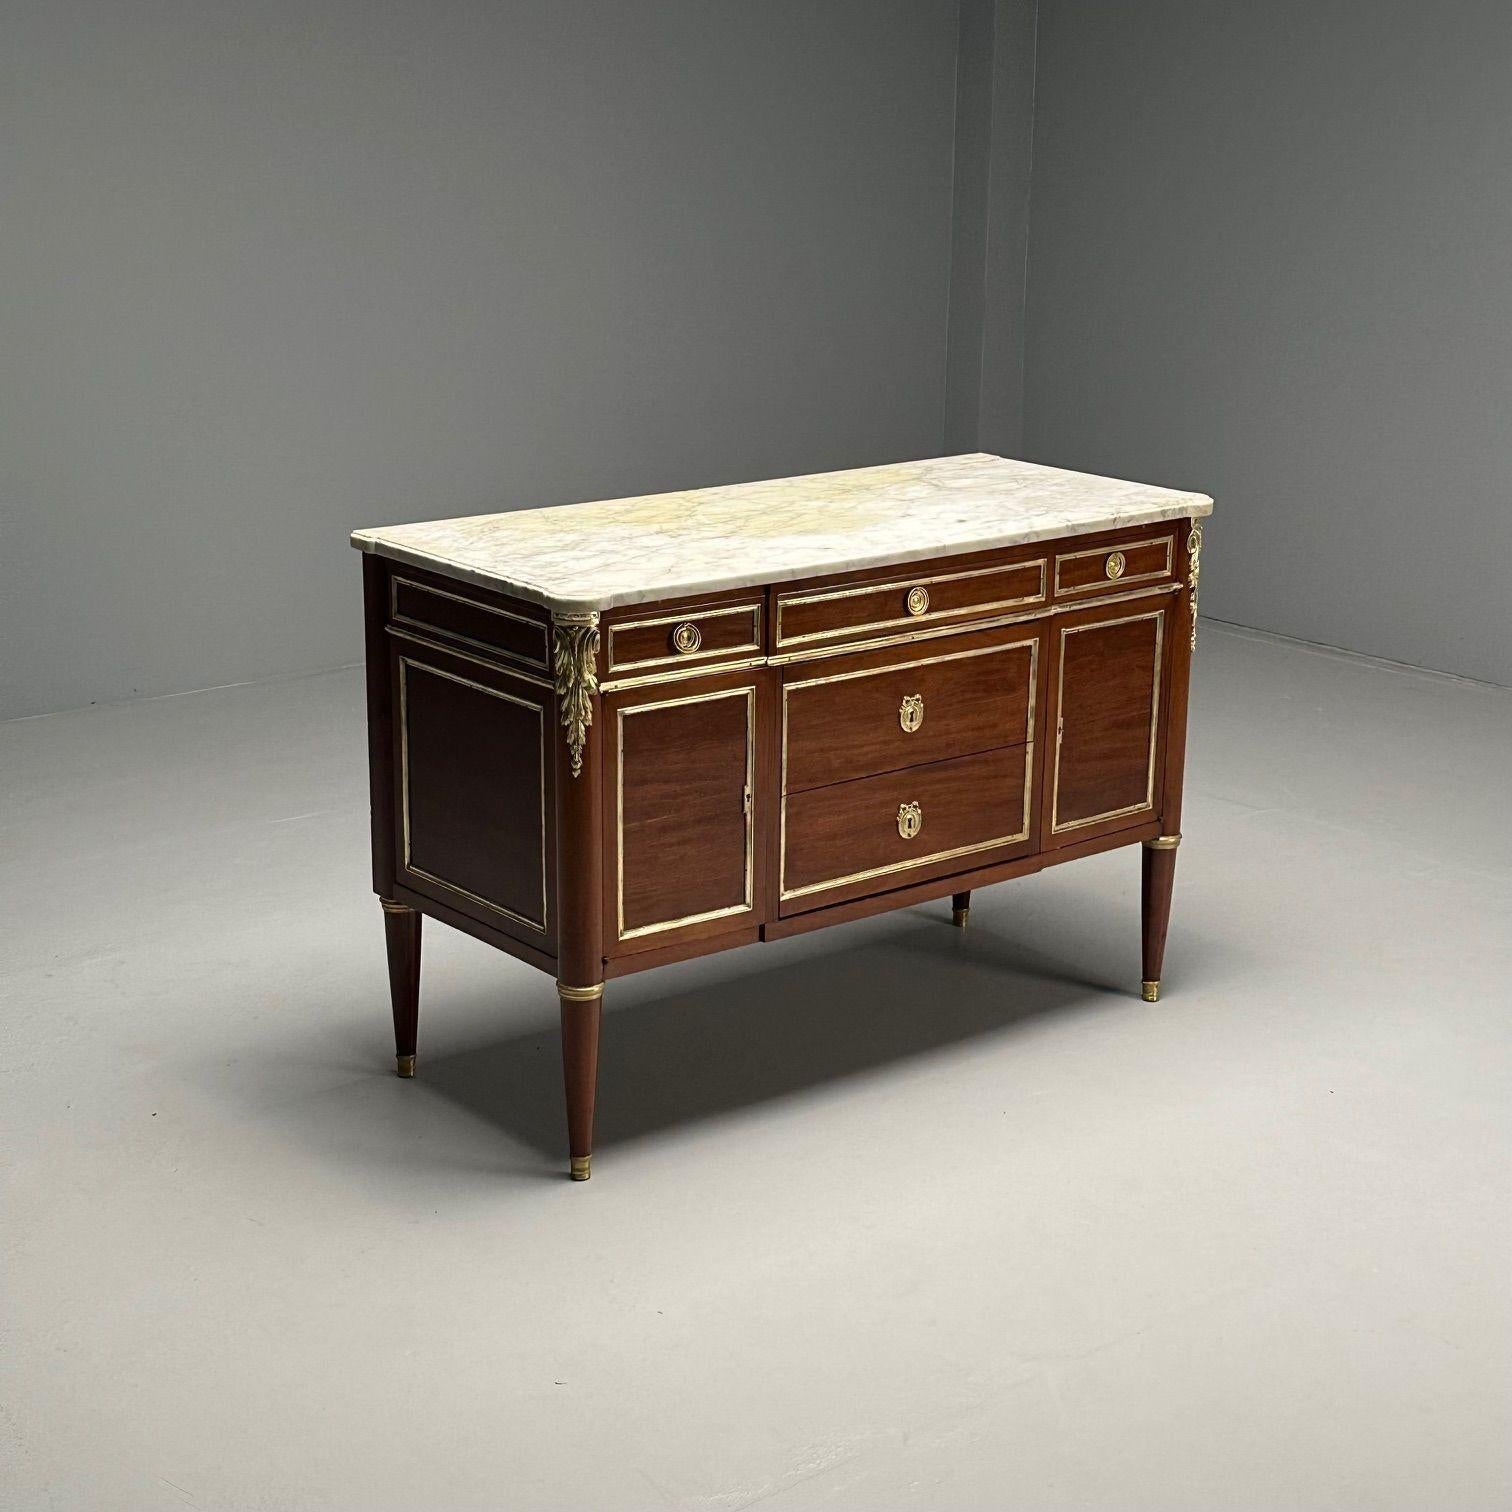 Hollywood Regency, French Louis XVI Style Commode, Mahogany, Marble, France, 1920s
 
Maison Jansen inspired Mahogany commode with bronze mounts on the foot corners and bronze framing on all drawers and sides. This finely crafted commode is fully